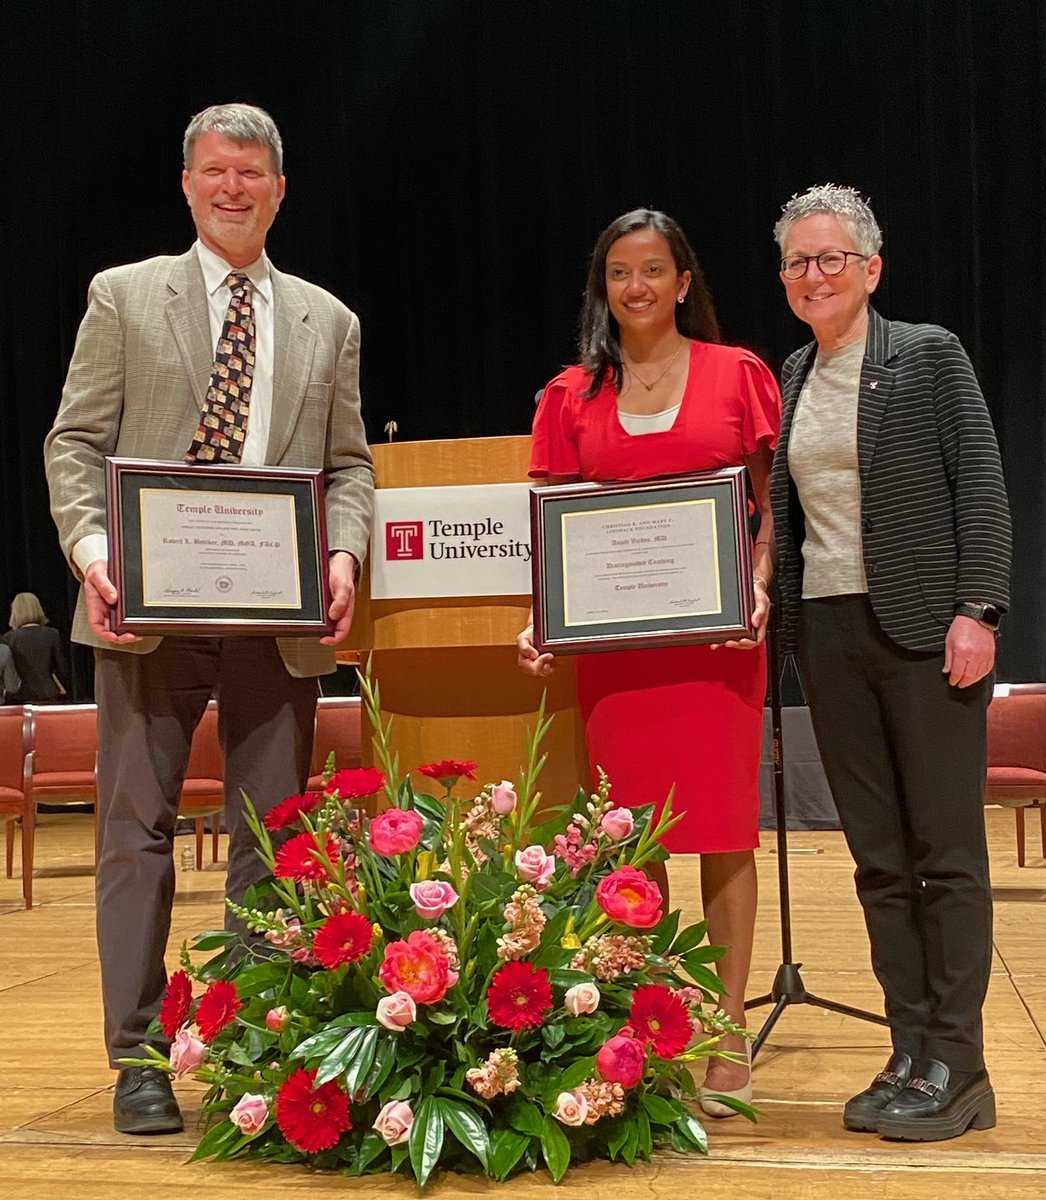 So proud to have honored Dr. Robert Bettiker and @anjalivaidyaMD at @TempleUniv Faculty Award ceremony! They are true embodiments of #TempleMed’s commitment to the advancement of medical education and #healthequity.